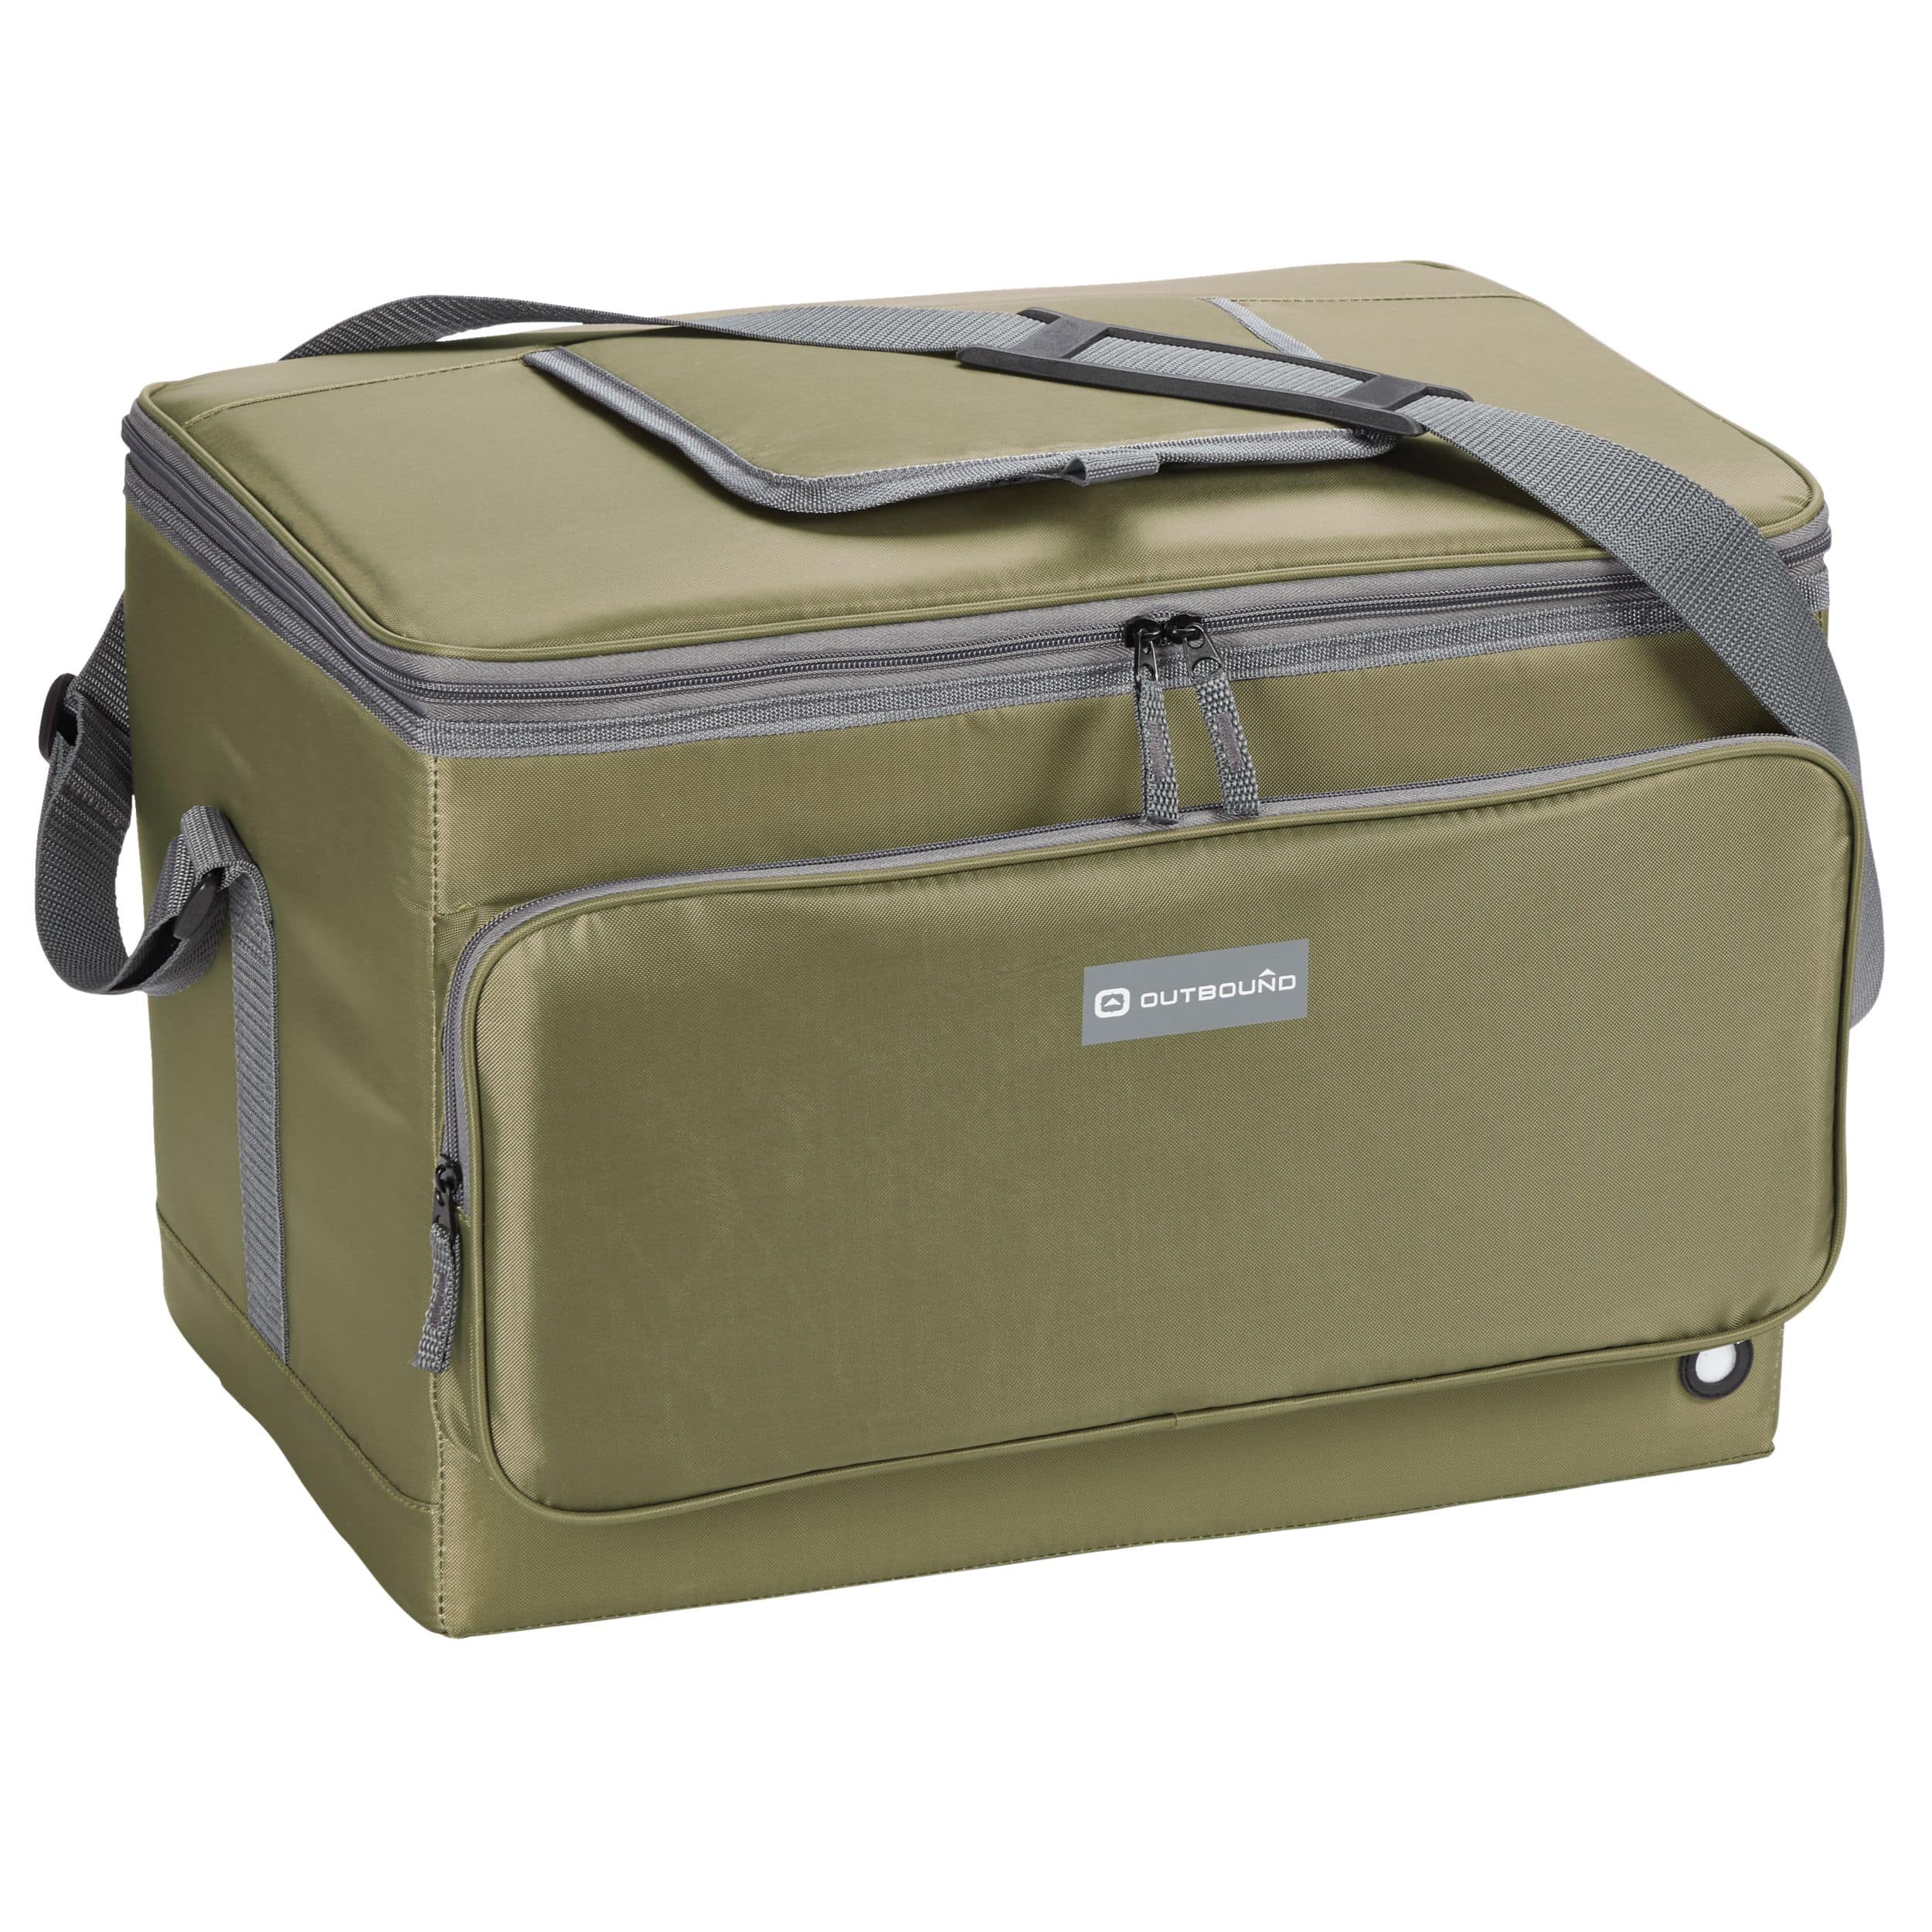 https://media-www.canadiantire.ca/product/playing/camping/hydration-coolers/0853724/outbound-large-collapsible-cooler-48-can-8a6aa9c0-c53f-47f3-a34b-c6a3cb5ff7cd-jpgrendition.jpg